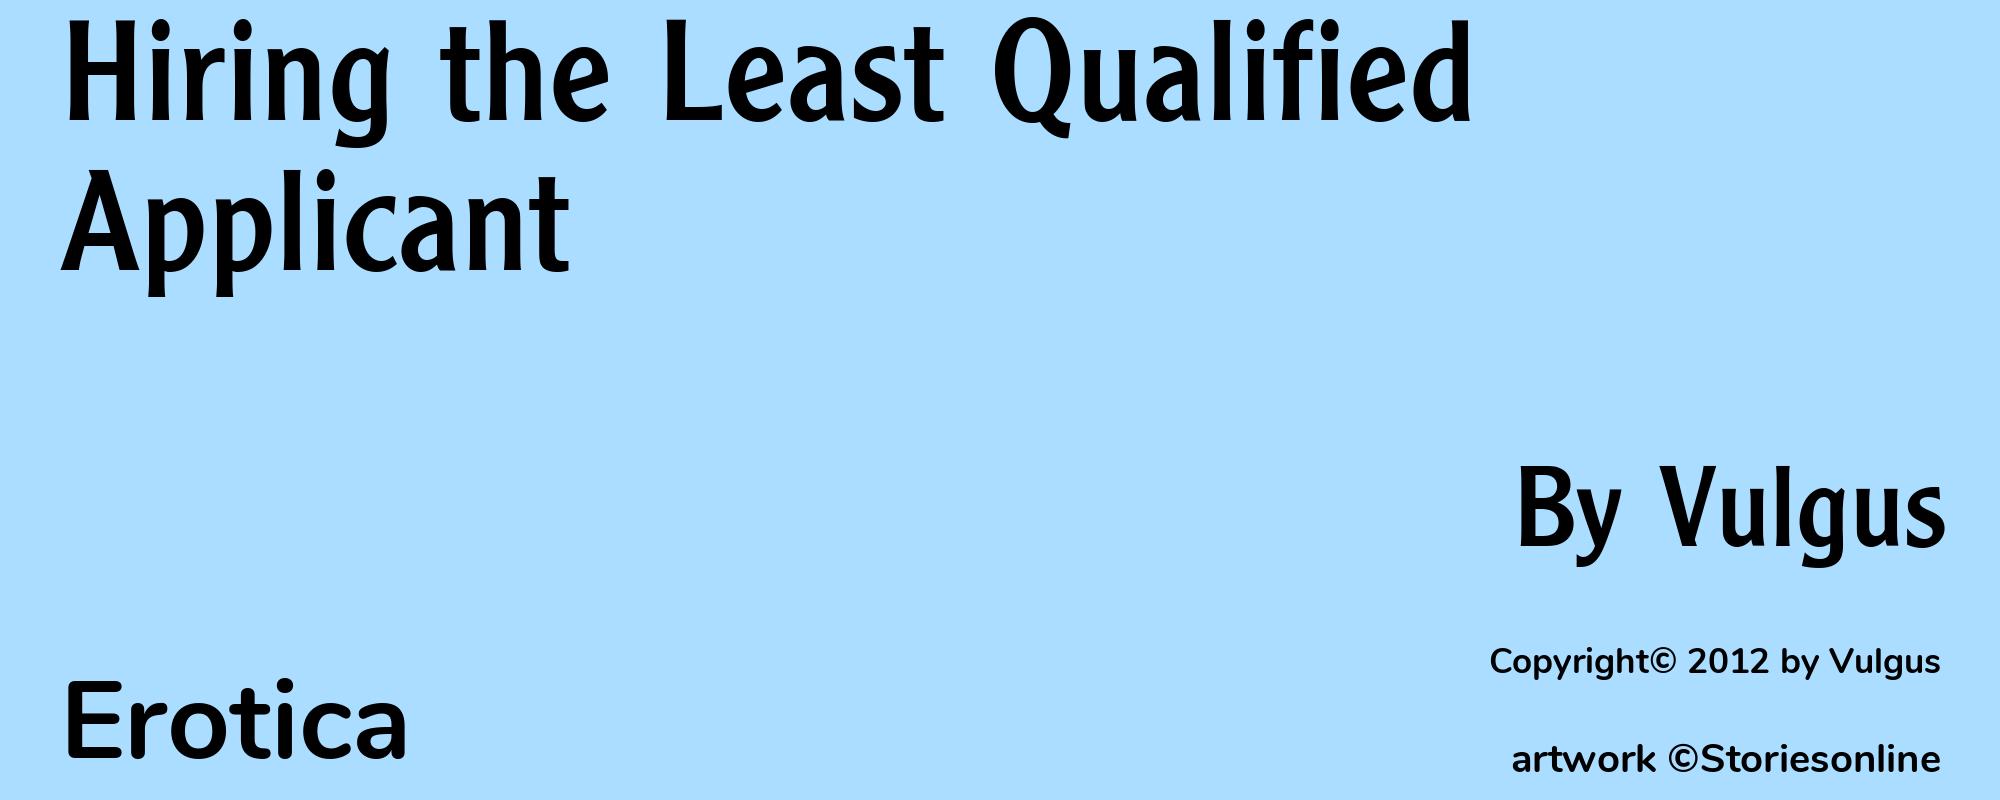 Hiring the Least Qualified Applicant - Cover